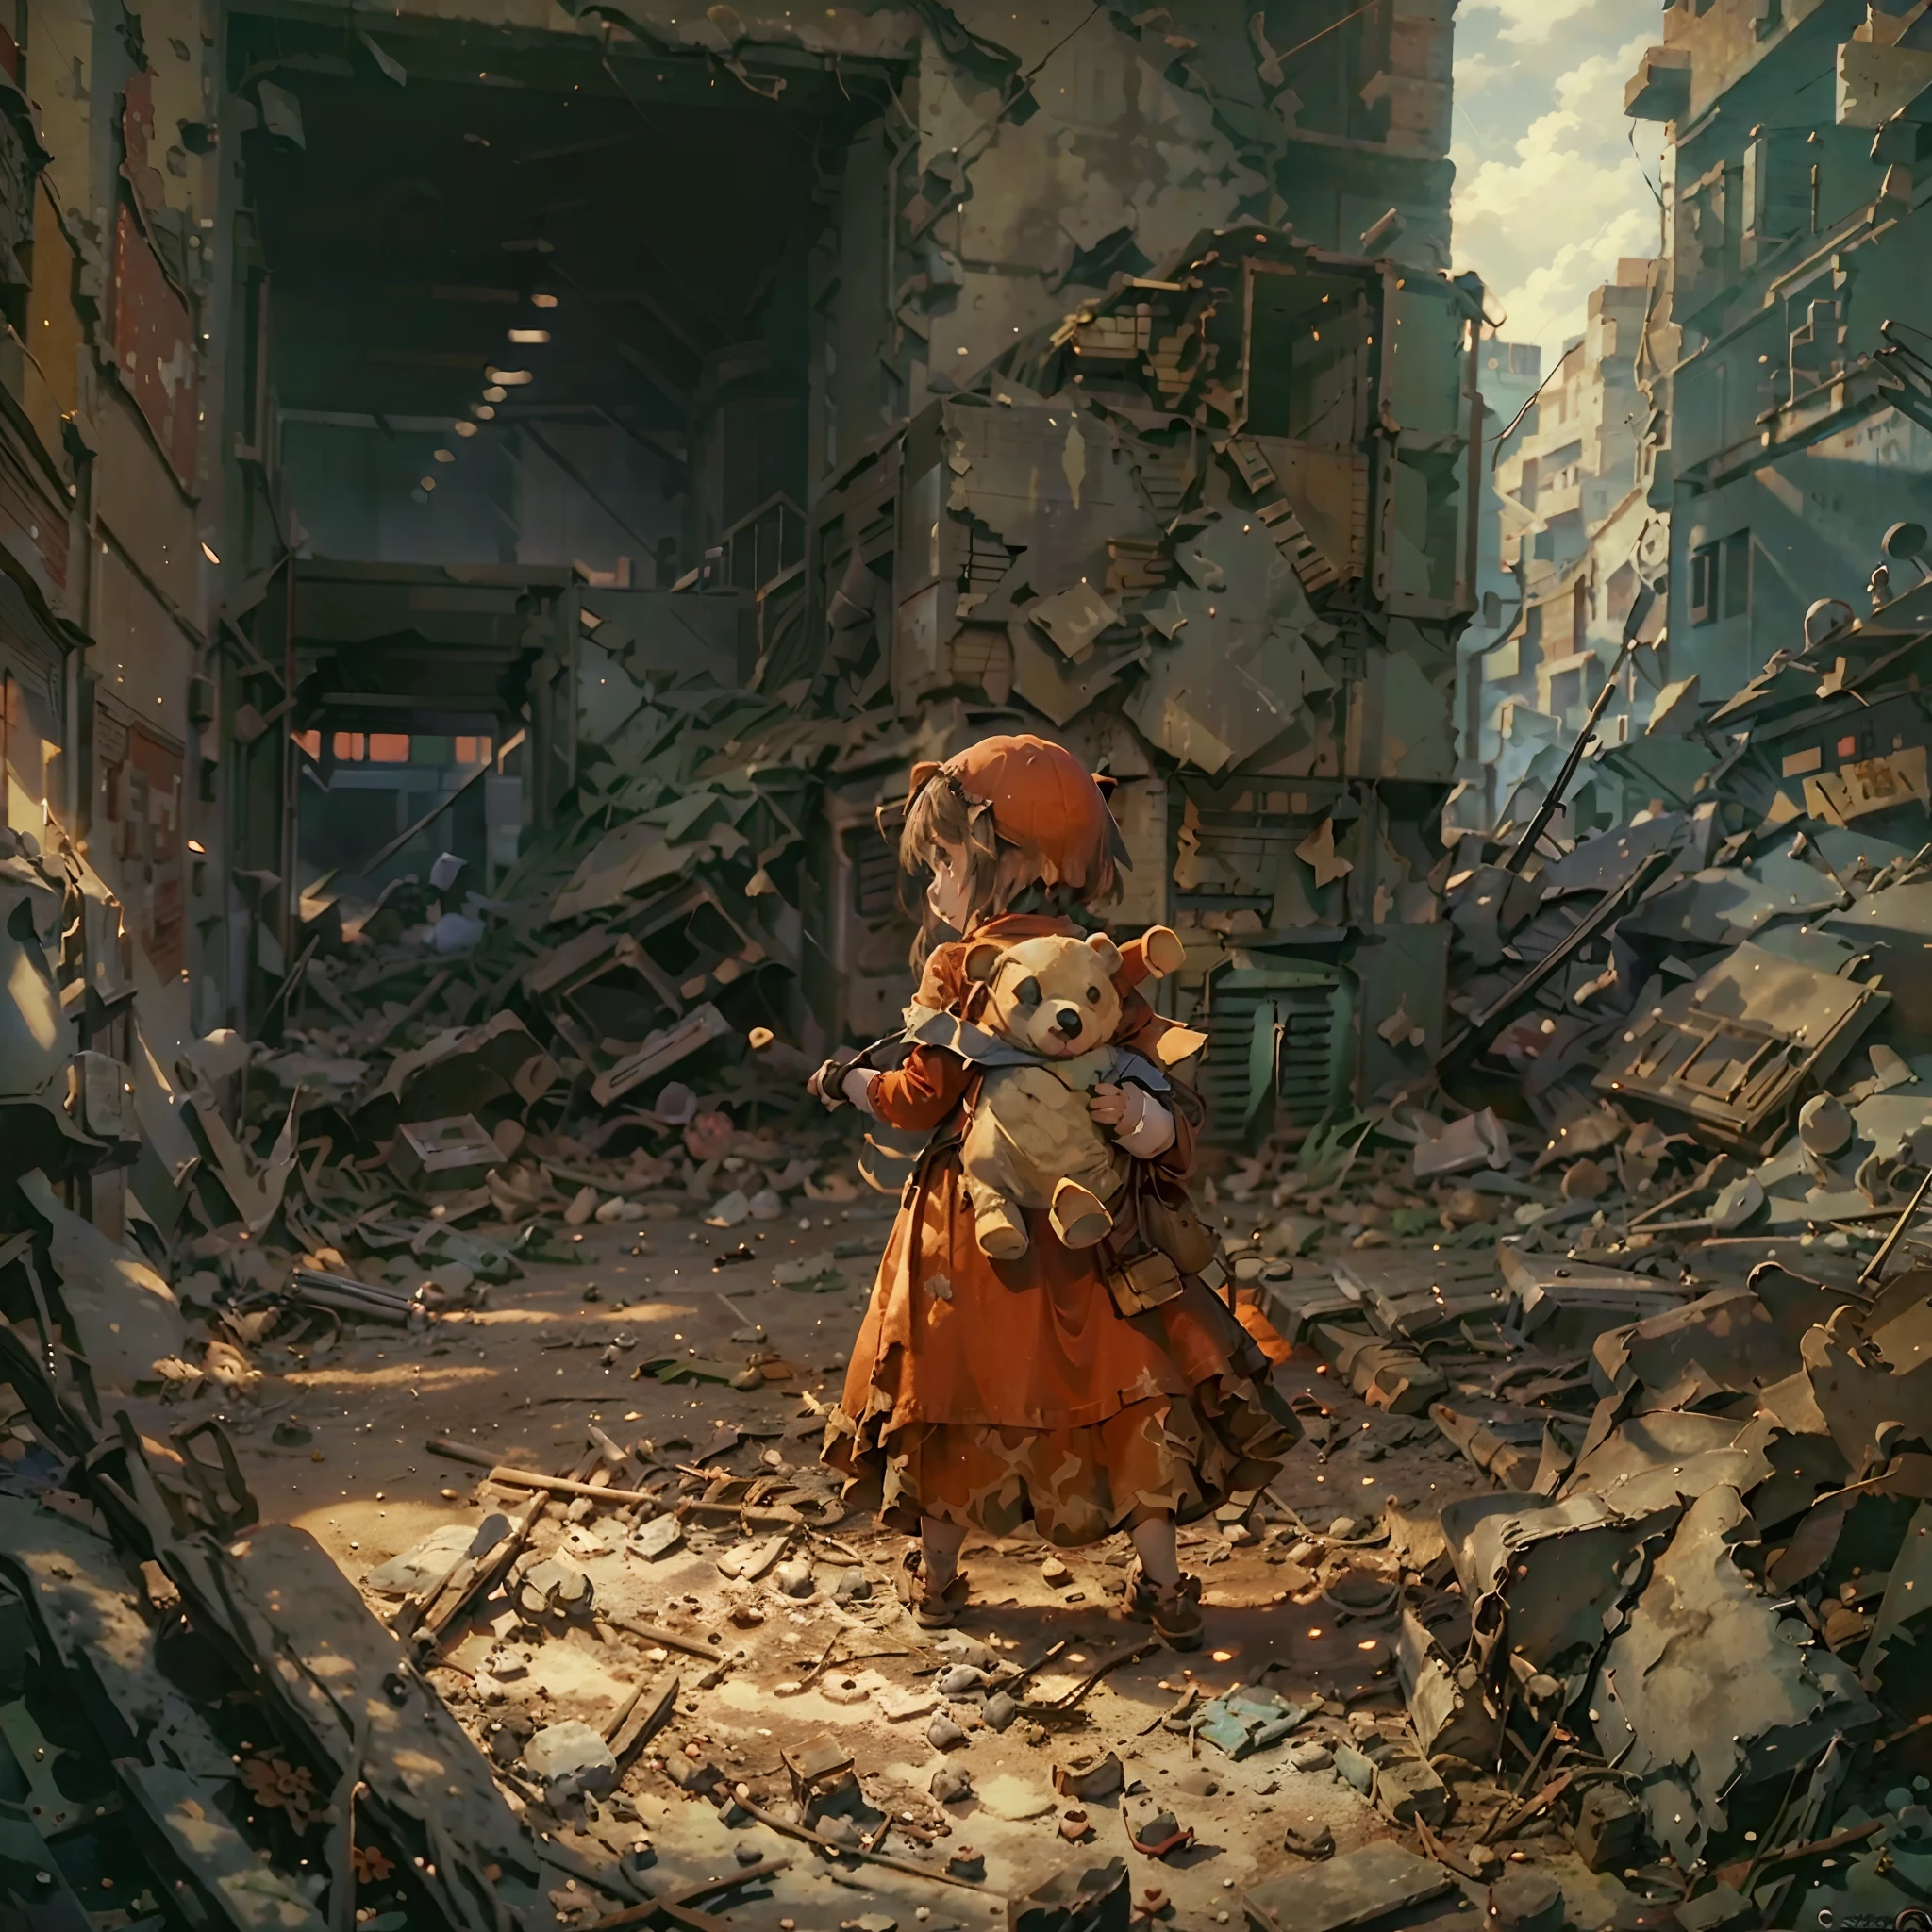 A  in a long red dress during the war，Carrying the back of a bear doll，Ruins of war，Dog's breakfast。（very wide angle shot，The focus is on the back of the character）The background of the picture is a dusty doomsday scene